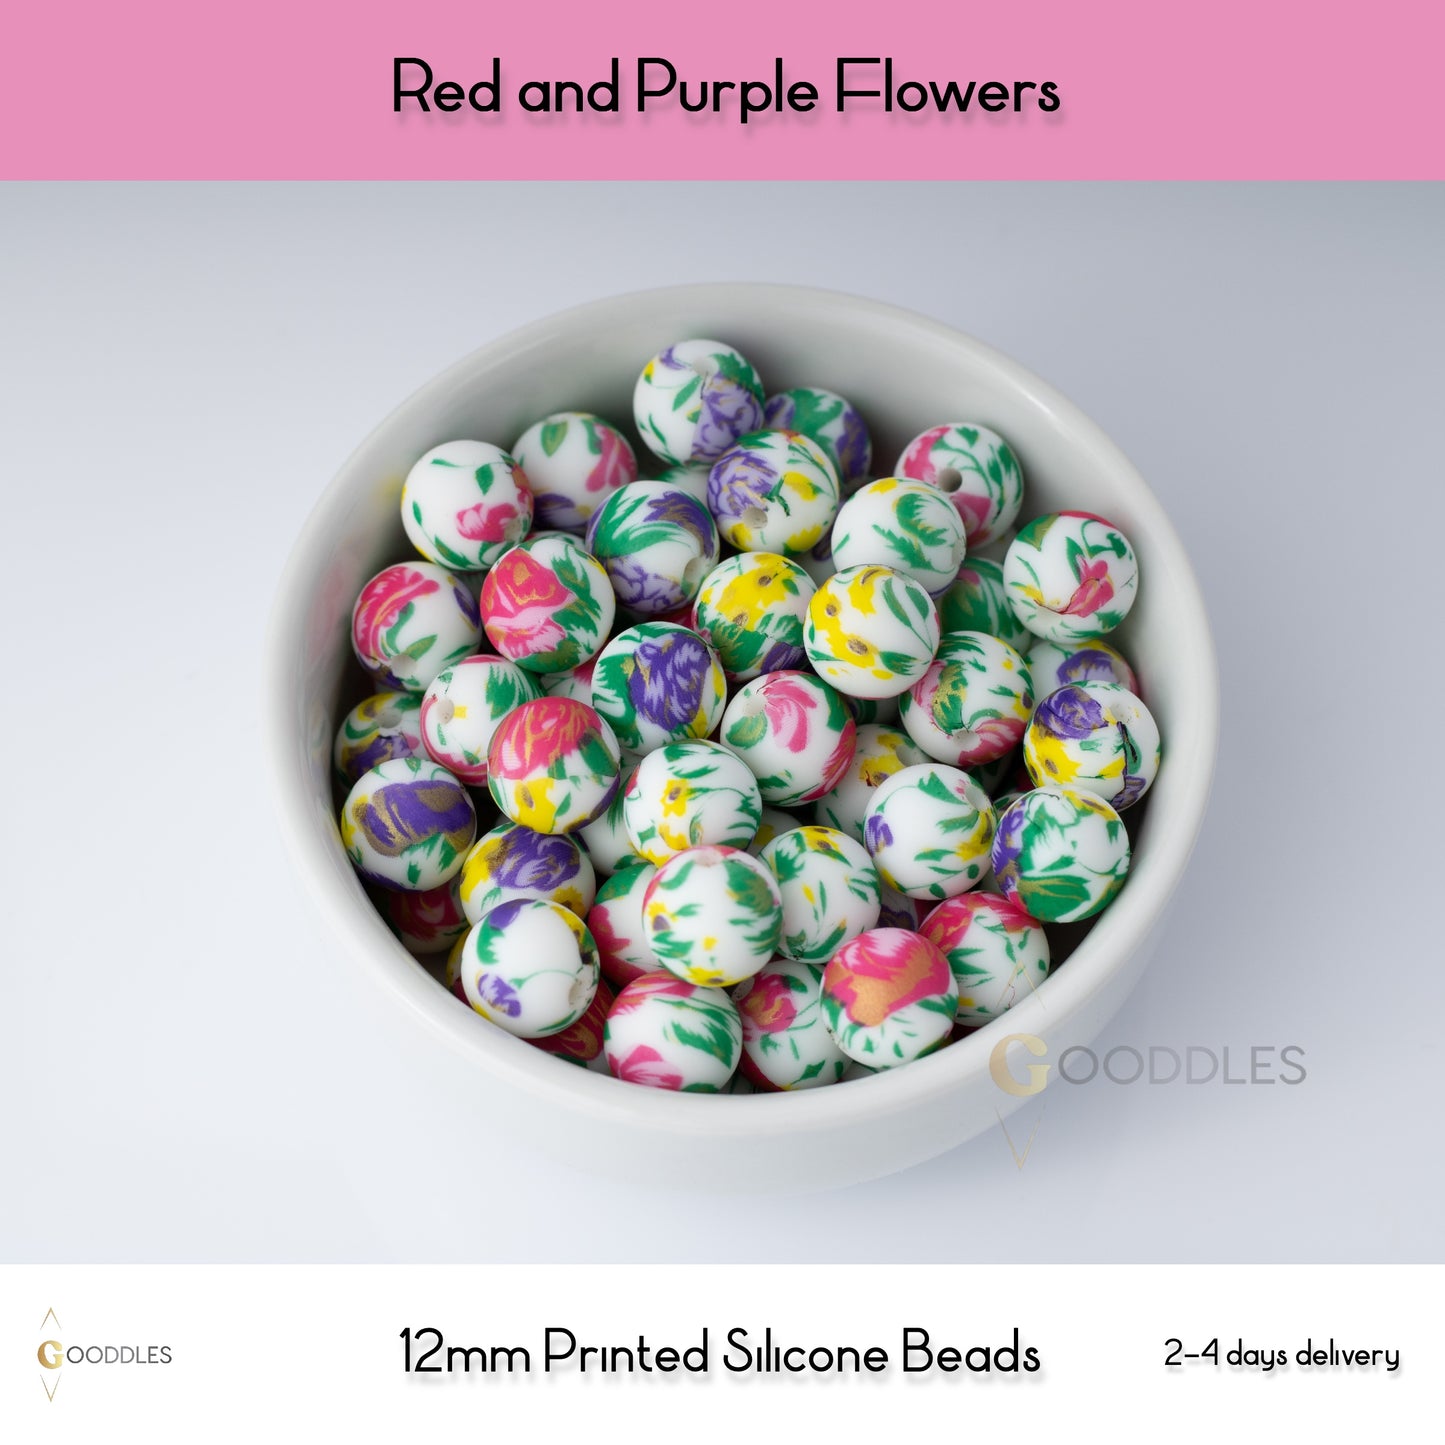 5pcs, Red and Purple Flowers Silicone Beads Printed Round Silicone Beads